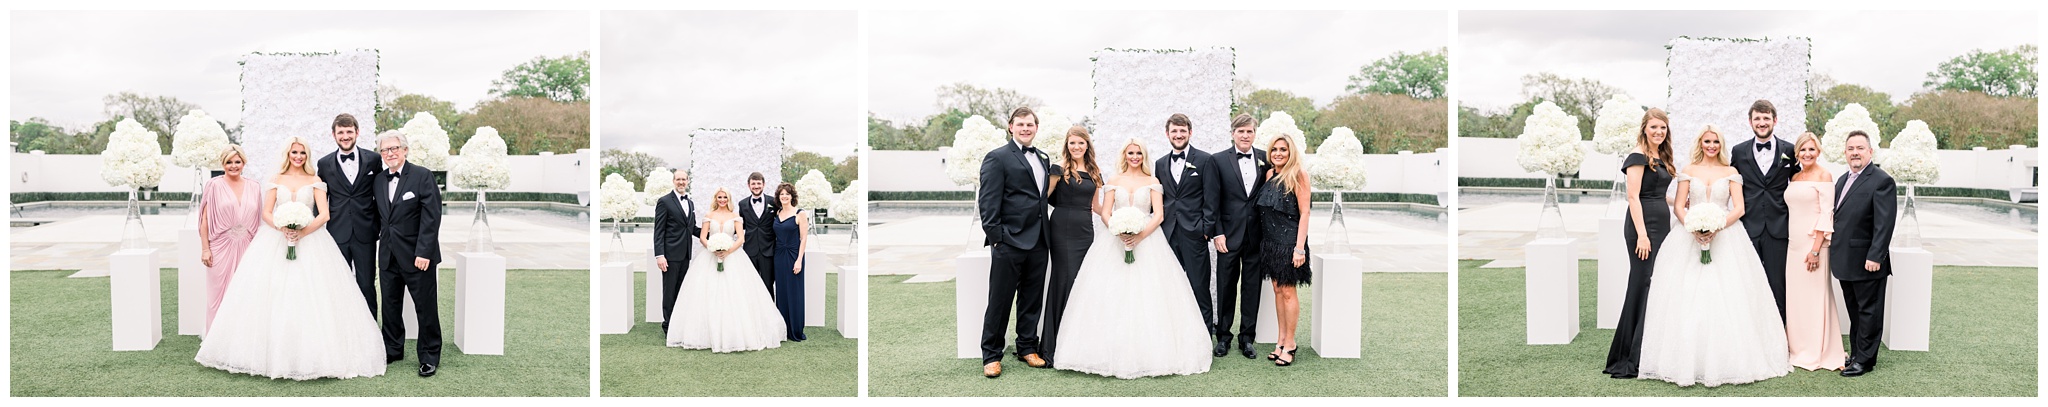 Monroe-Louisiana-Photographer-Bridals-The-Mansion-At-Redhill_0069